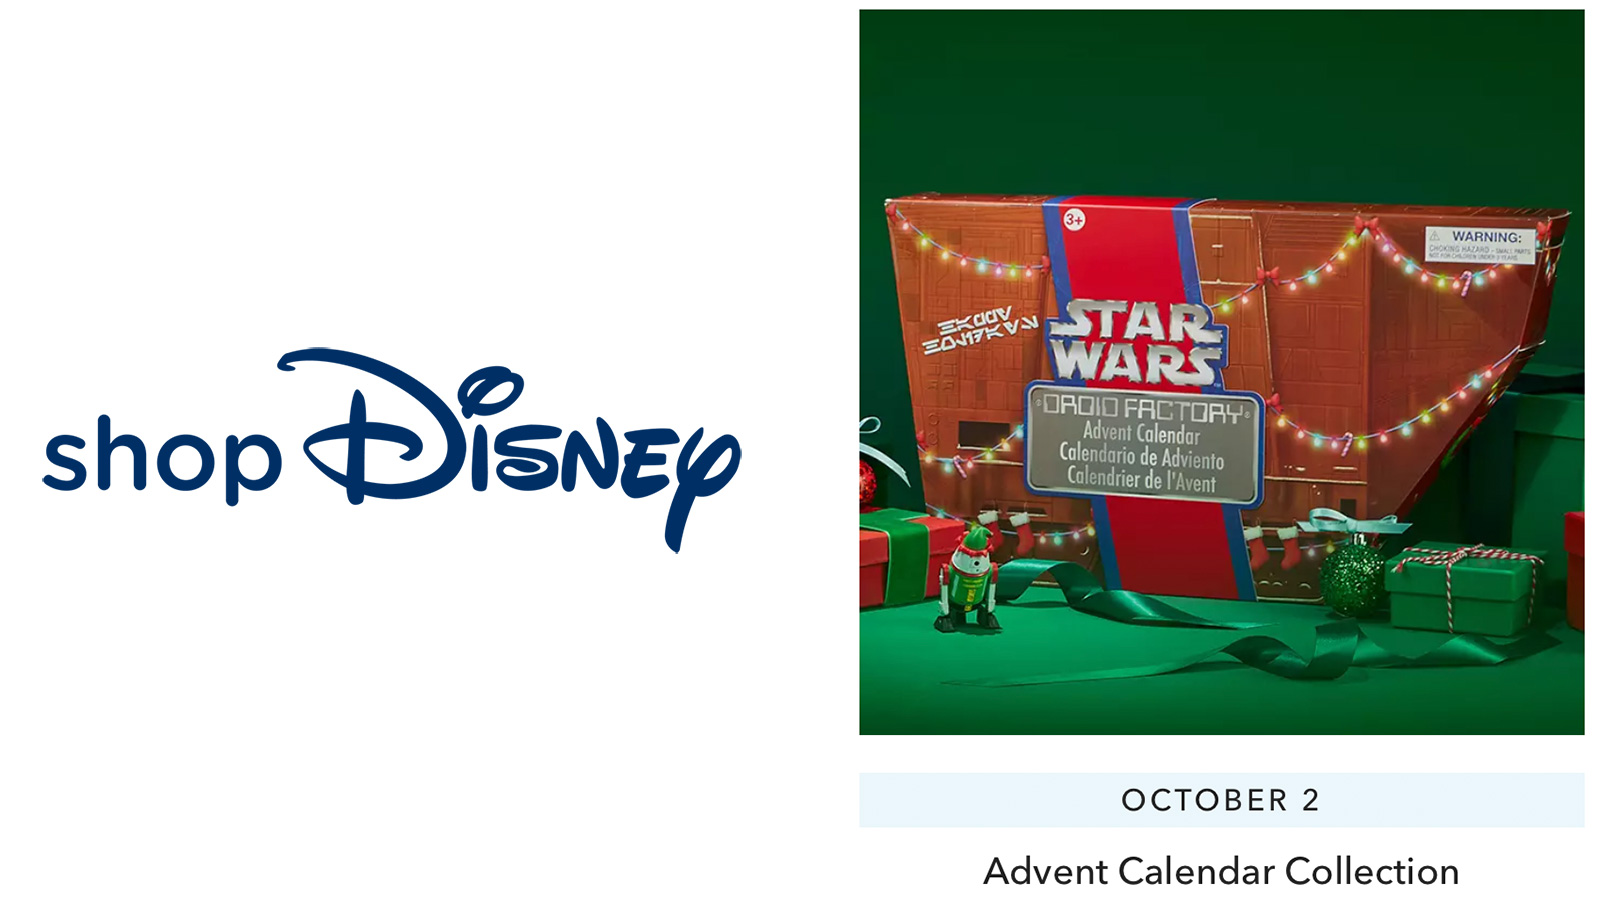 Return Of Disney’s Exclusive Star Wars Droid Factory Advent Calendar & New Holiday R8-H23